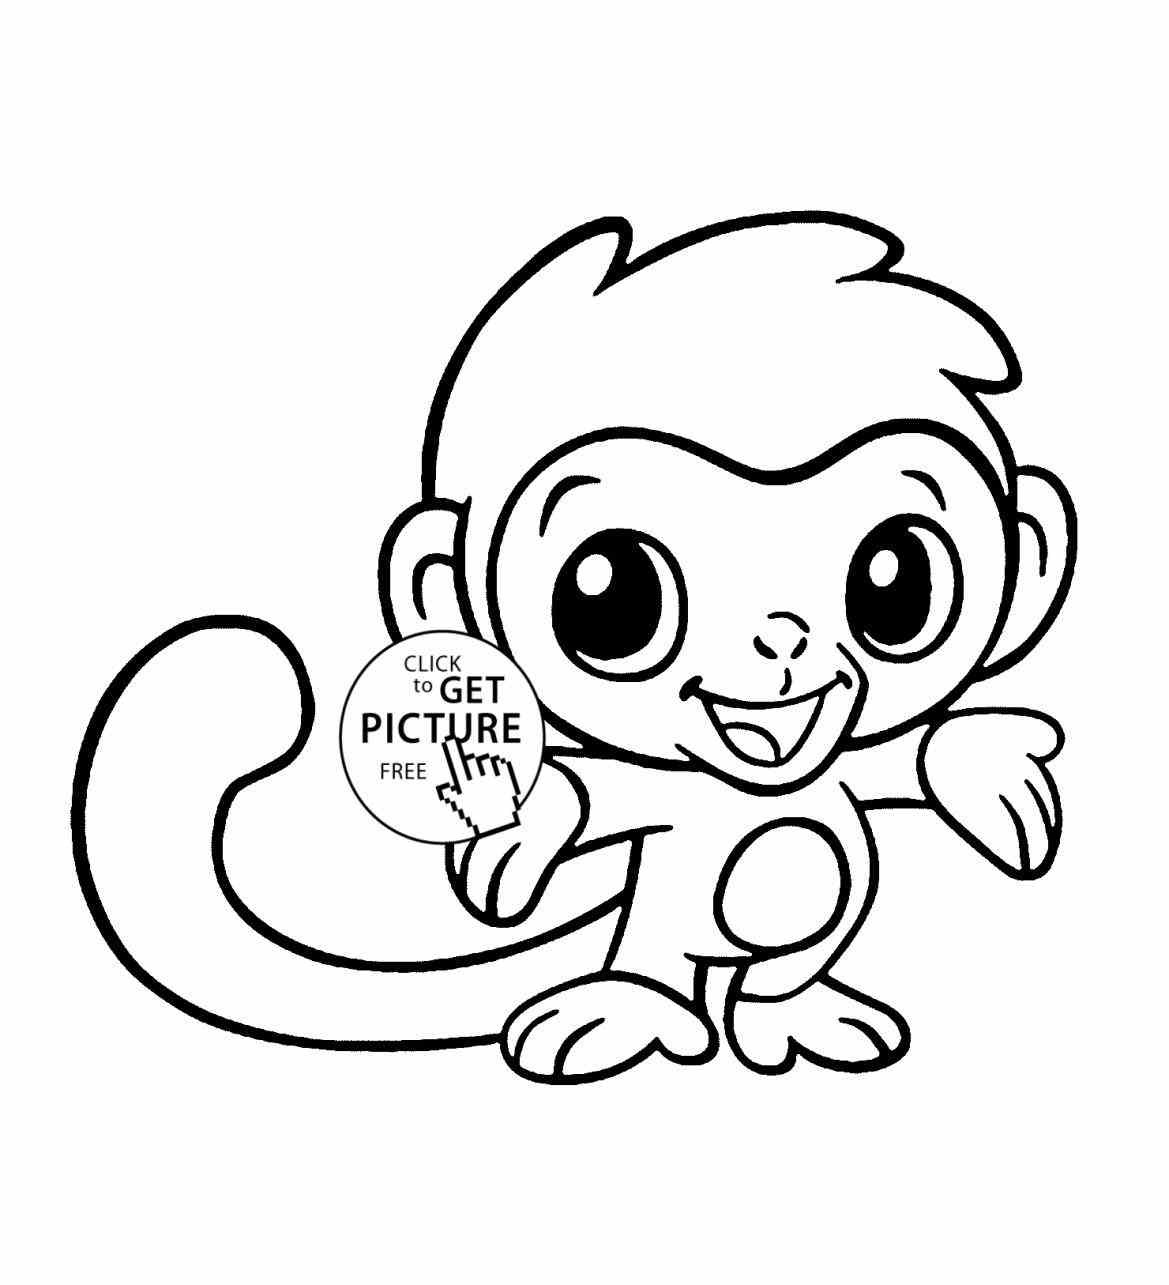 Cut Coloring Pages
 Monkey Coloring Pages Page Image Clipart grig3